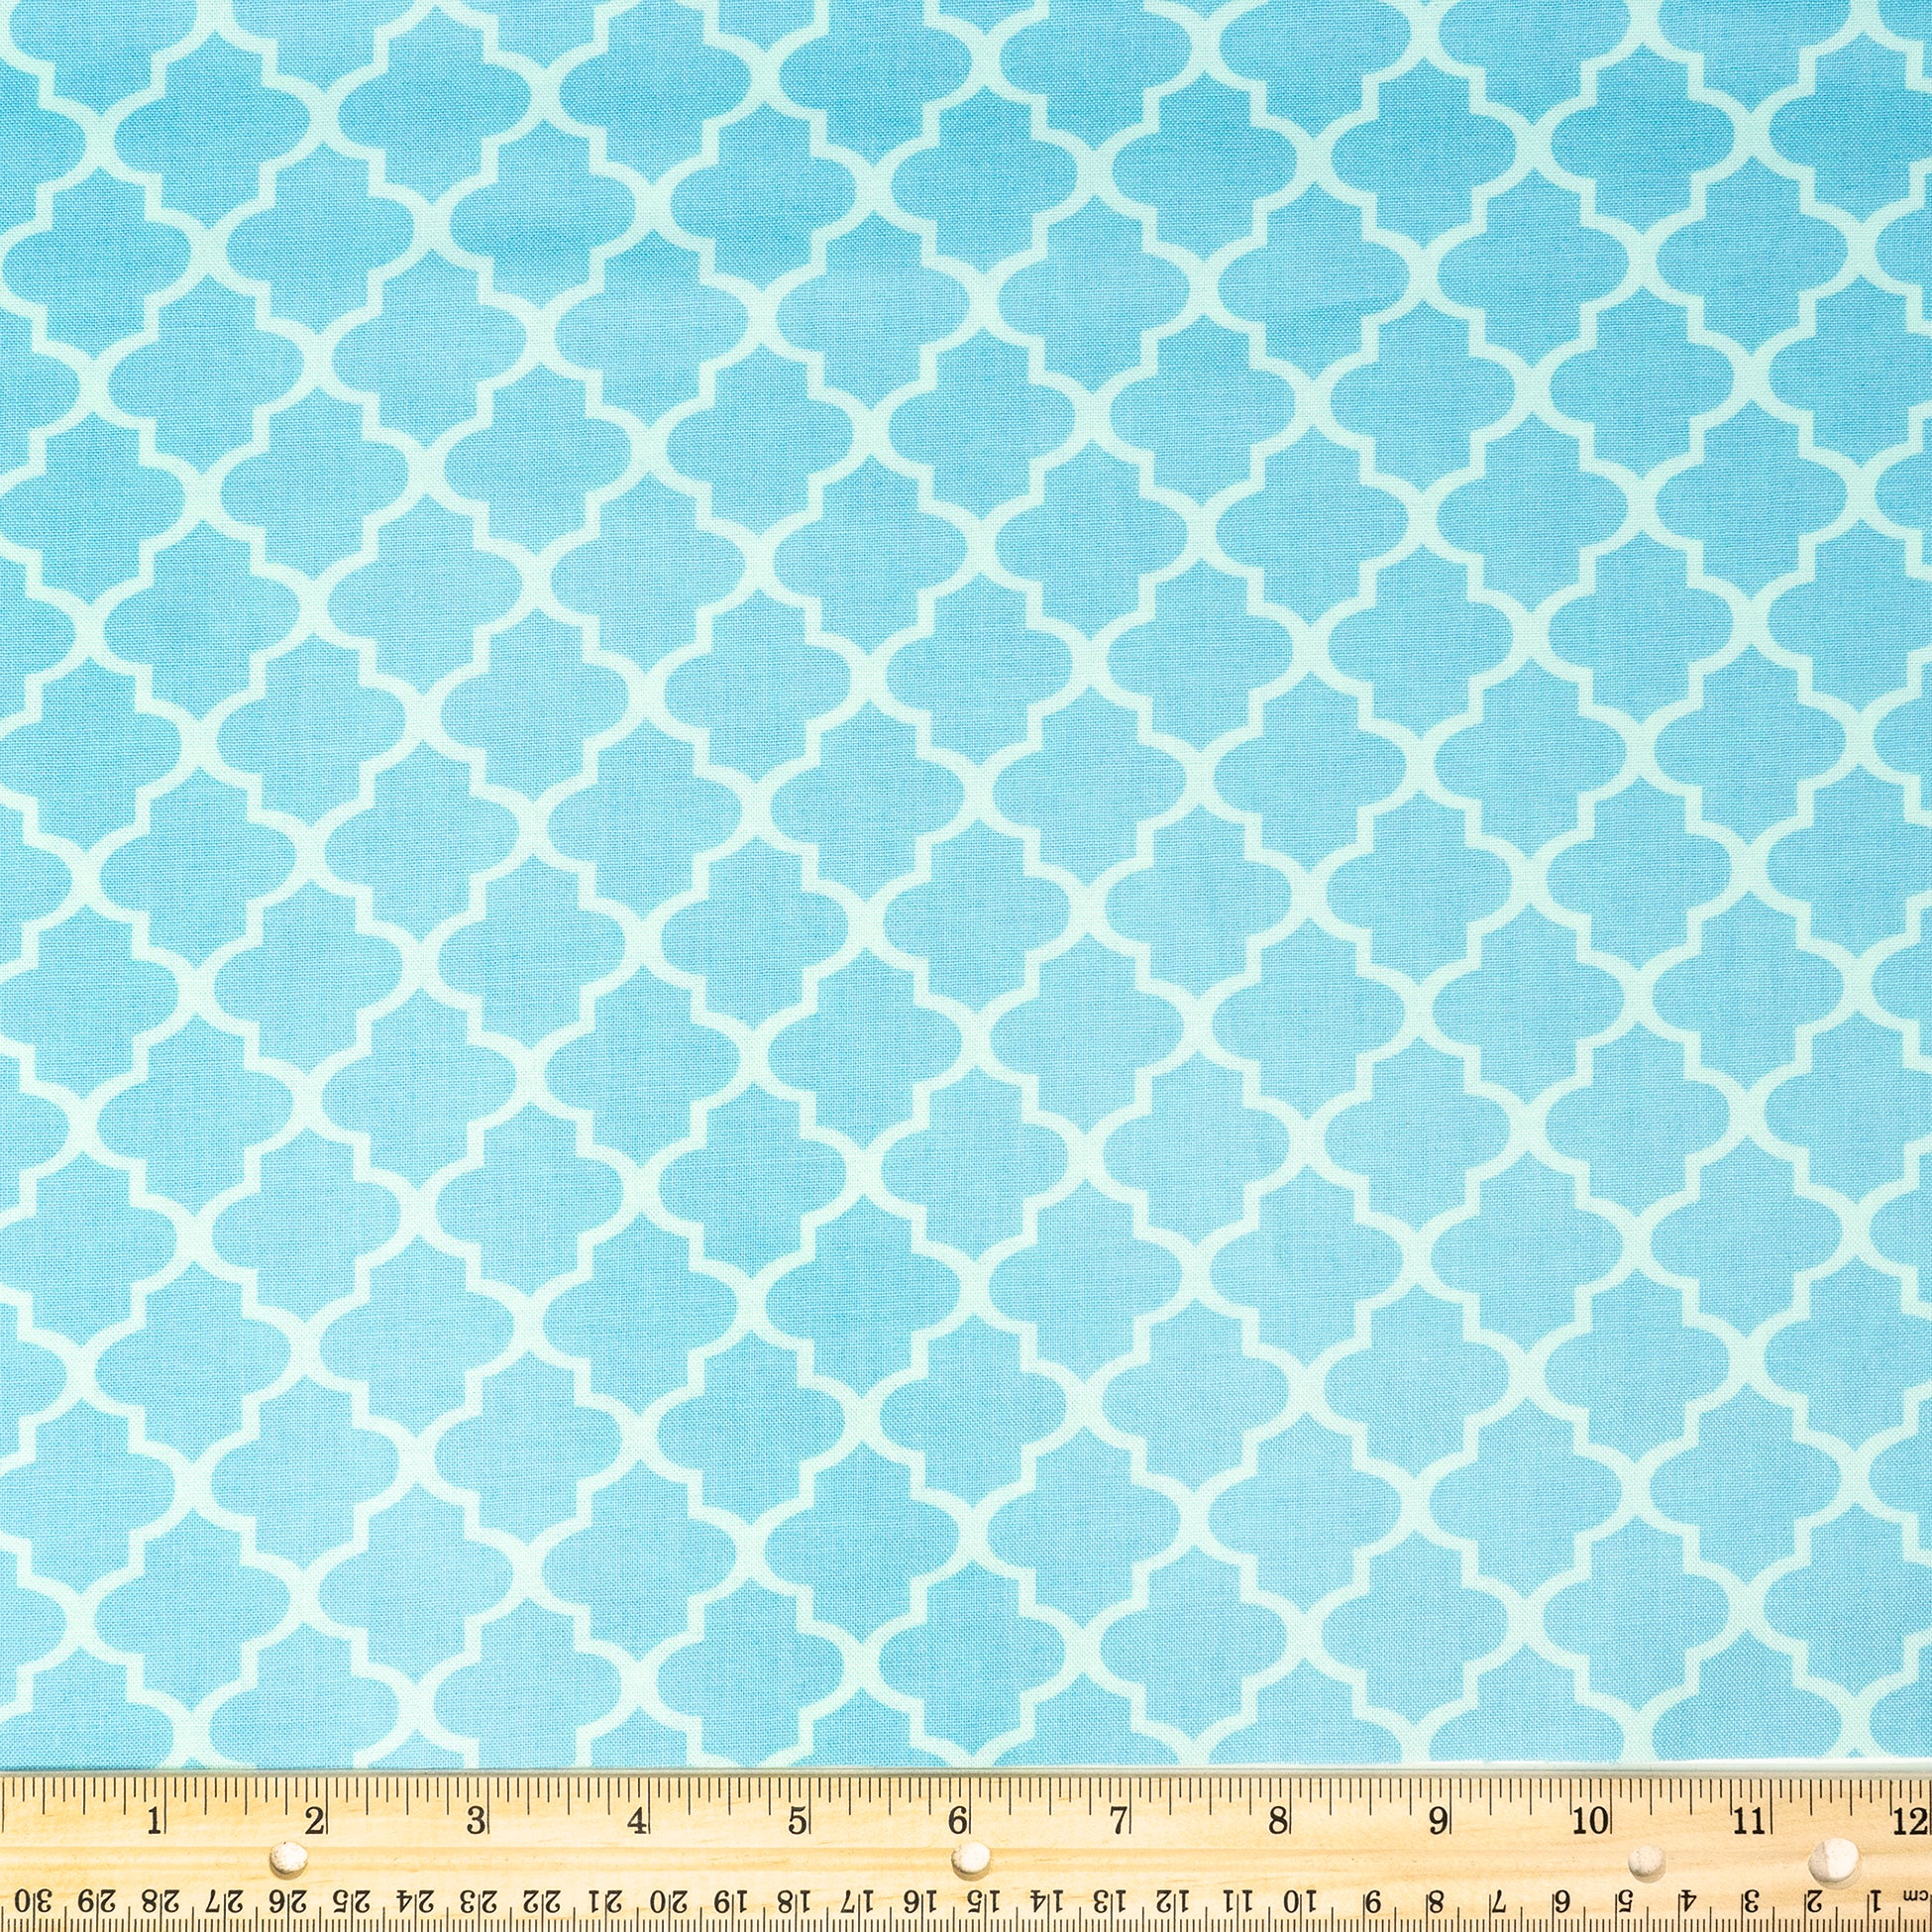 Waverly Inspirations Cotton 44" Twist Powder Blue Color Sewing Fabric by the Yard